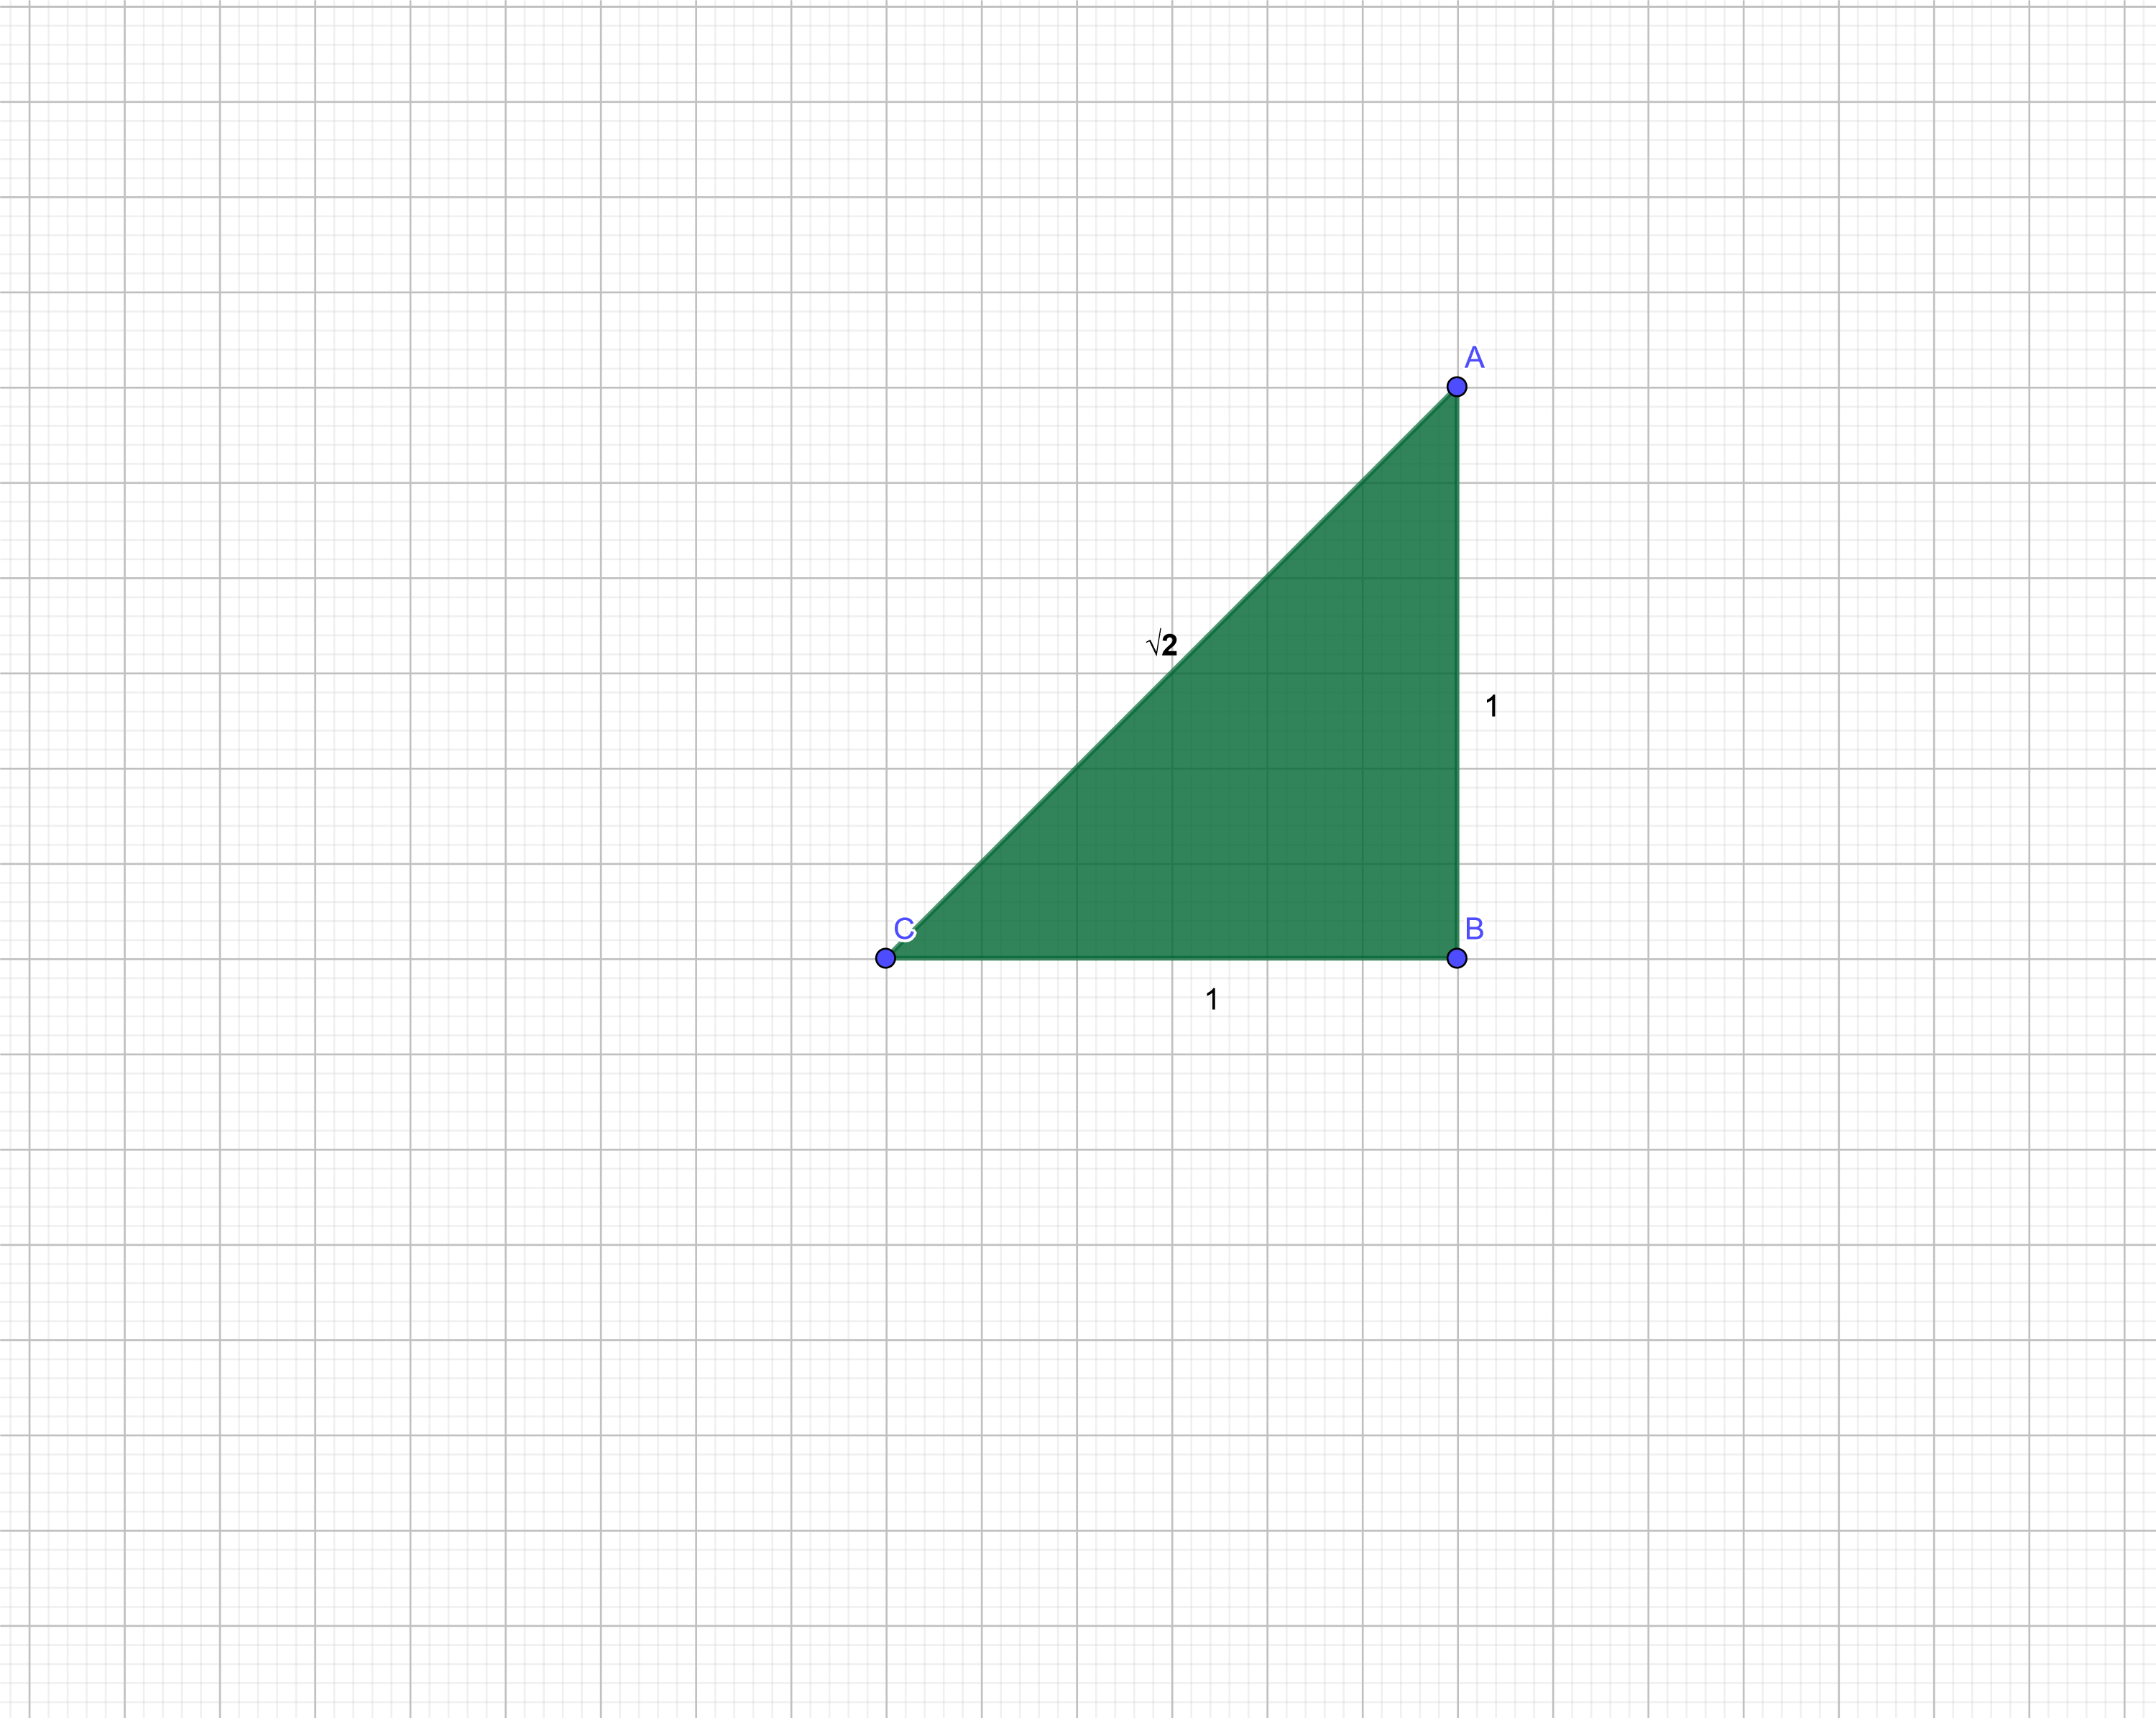 Hypotenuse showing the irrational number